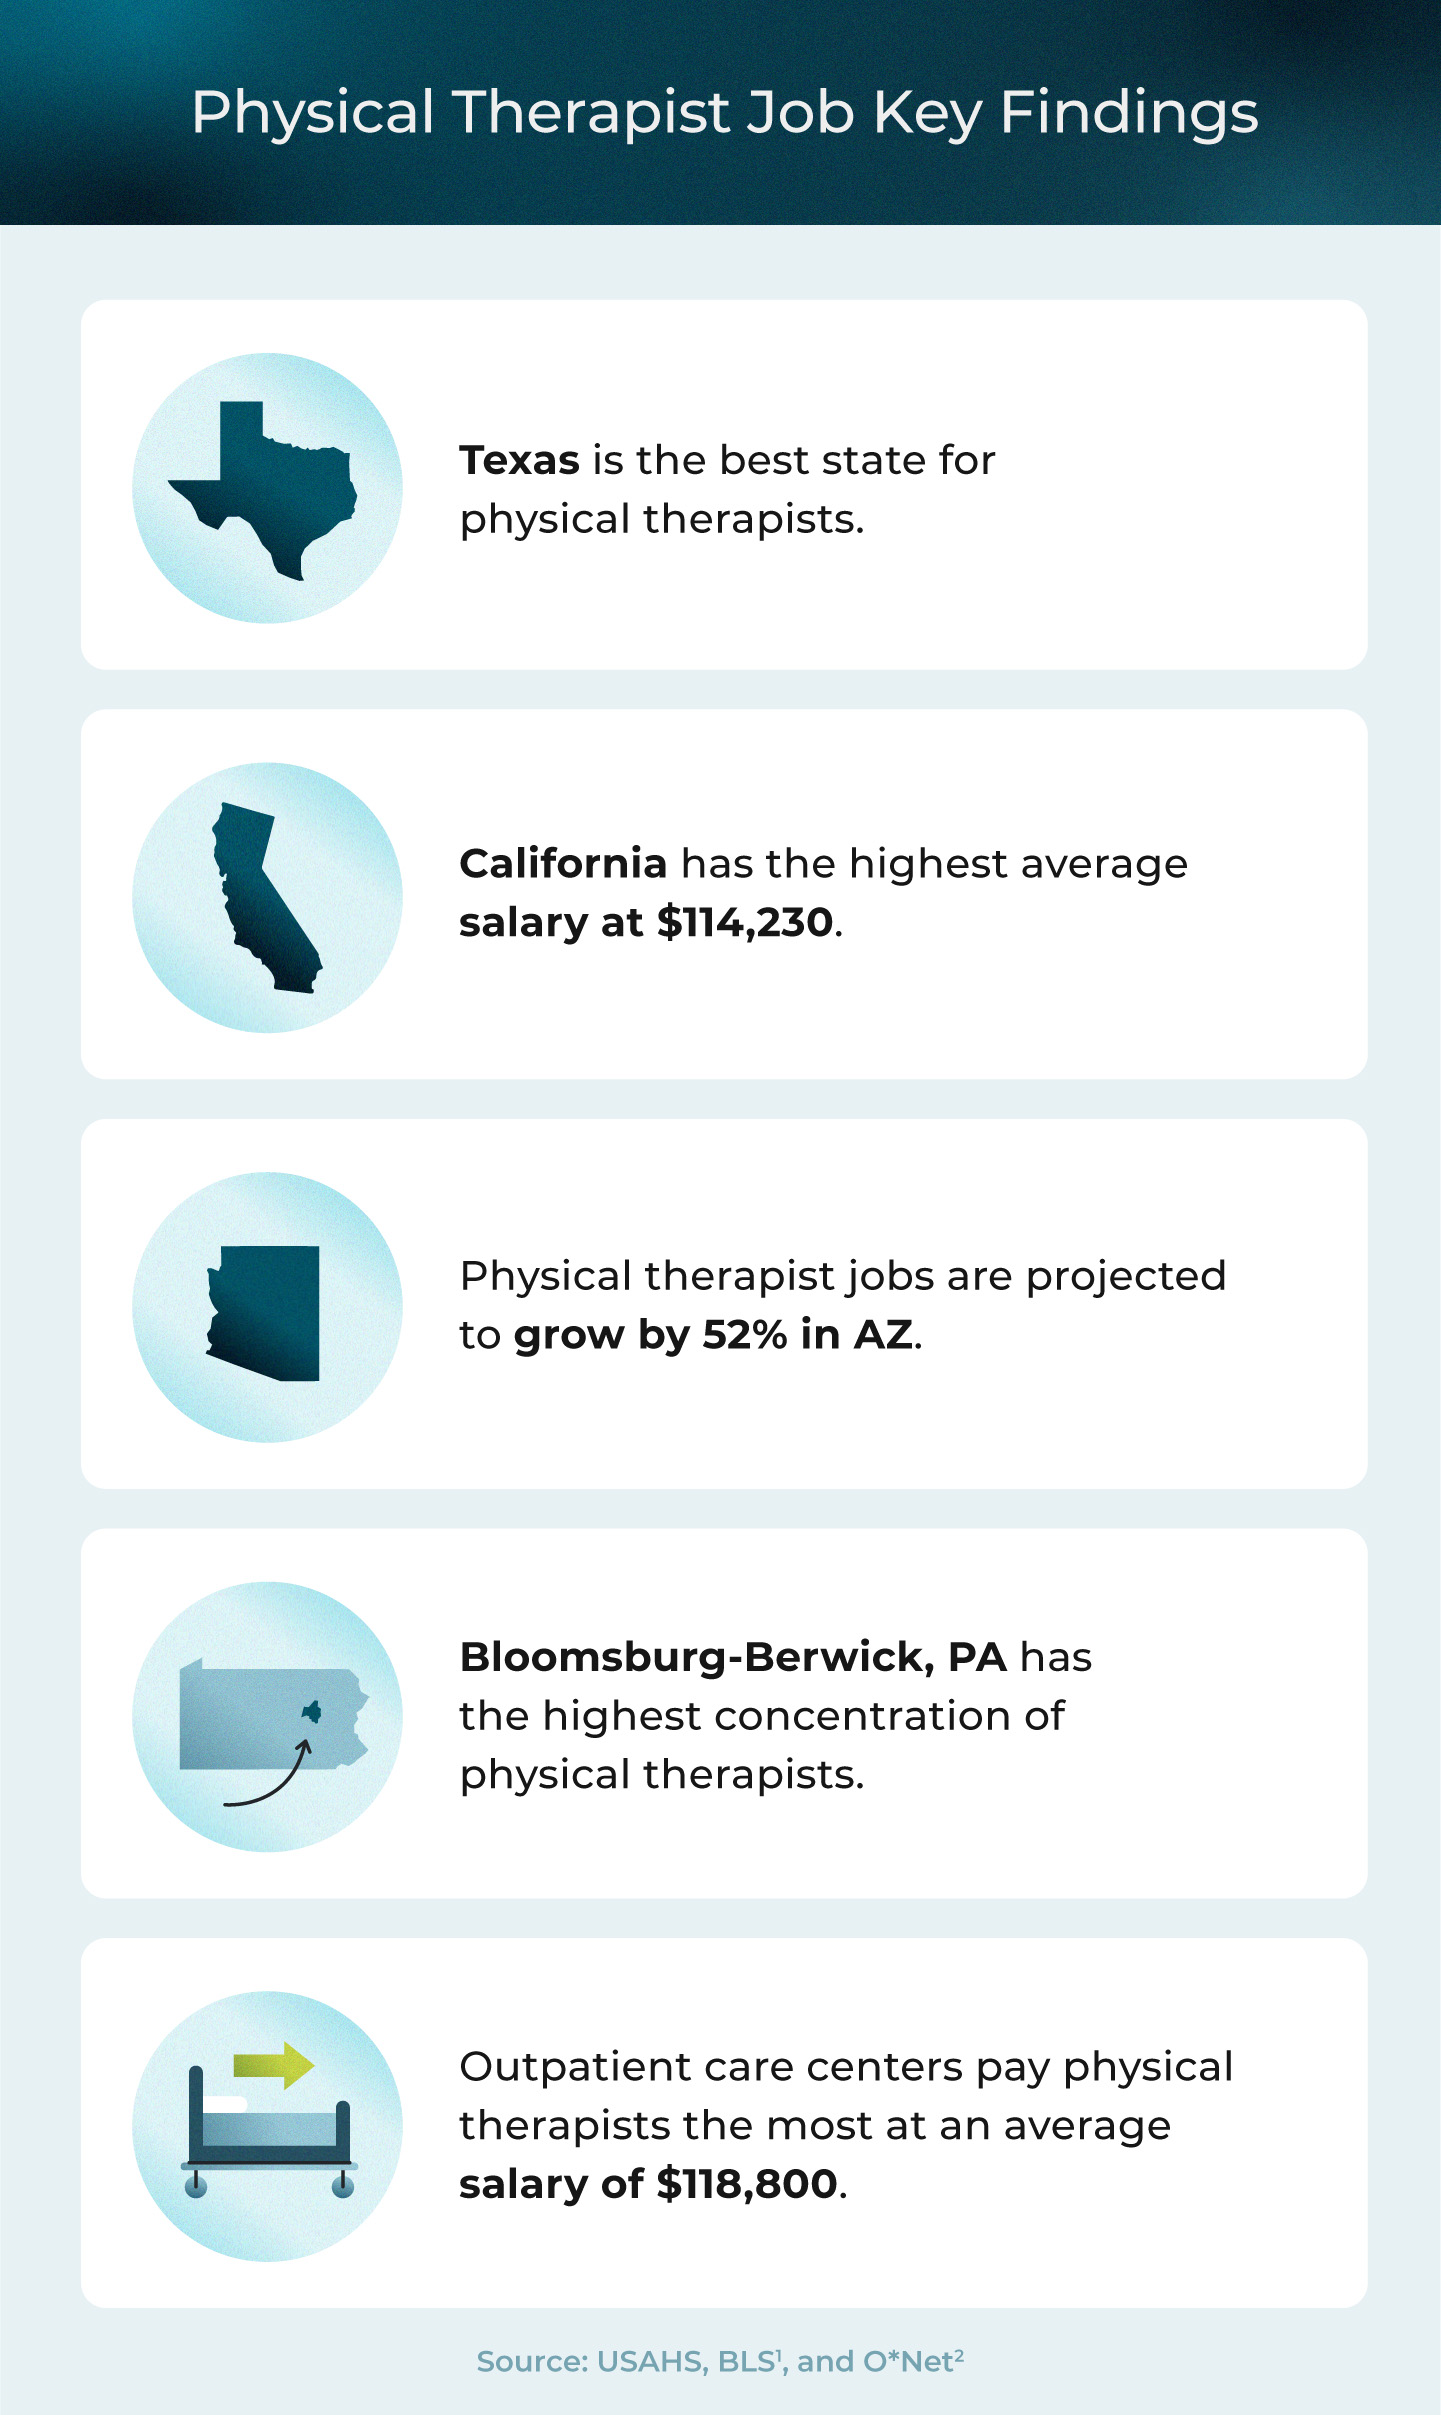 Key findings about physical therapist jobs.